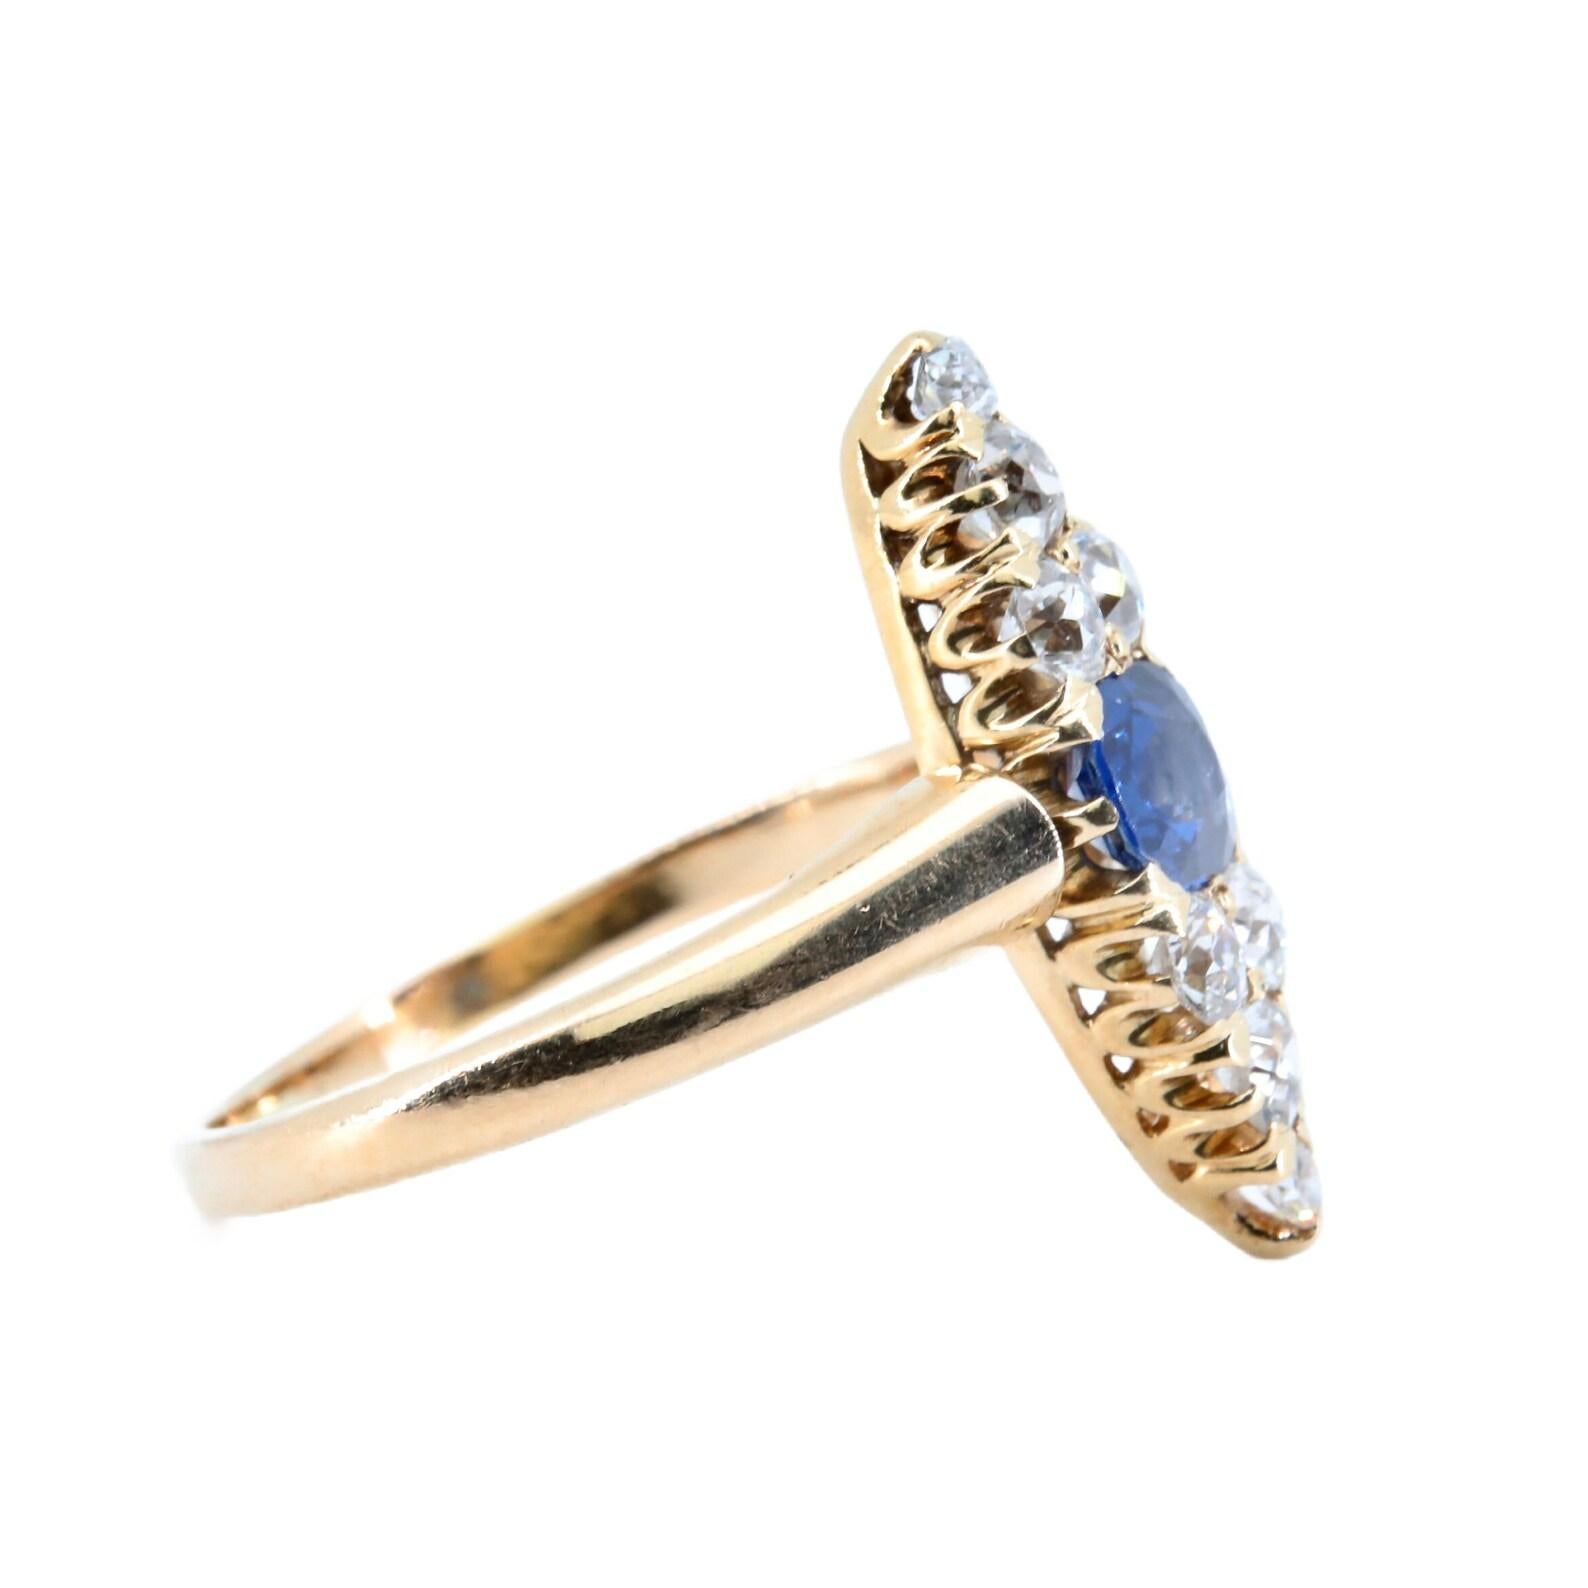 A late victorian period No Heat Sapphire, and old mine cut diamond ring.

Crafted in a traditional Navette form, this ring is centered by a 0.80 carat GIA Certified No Heat natural blue sapphire.

Framing the sapphire are eight old mine cut diamonds